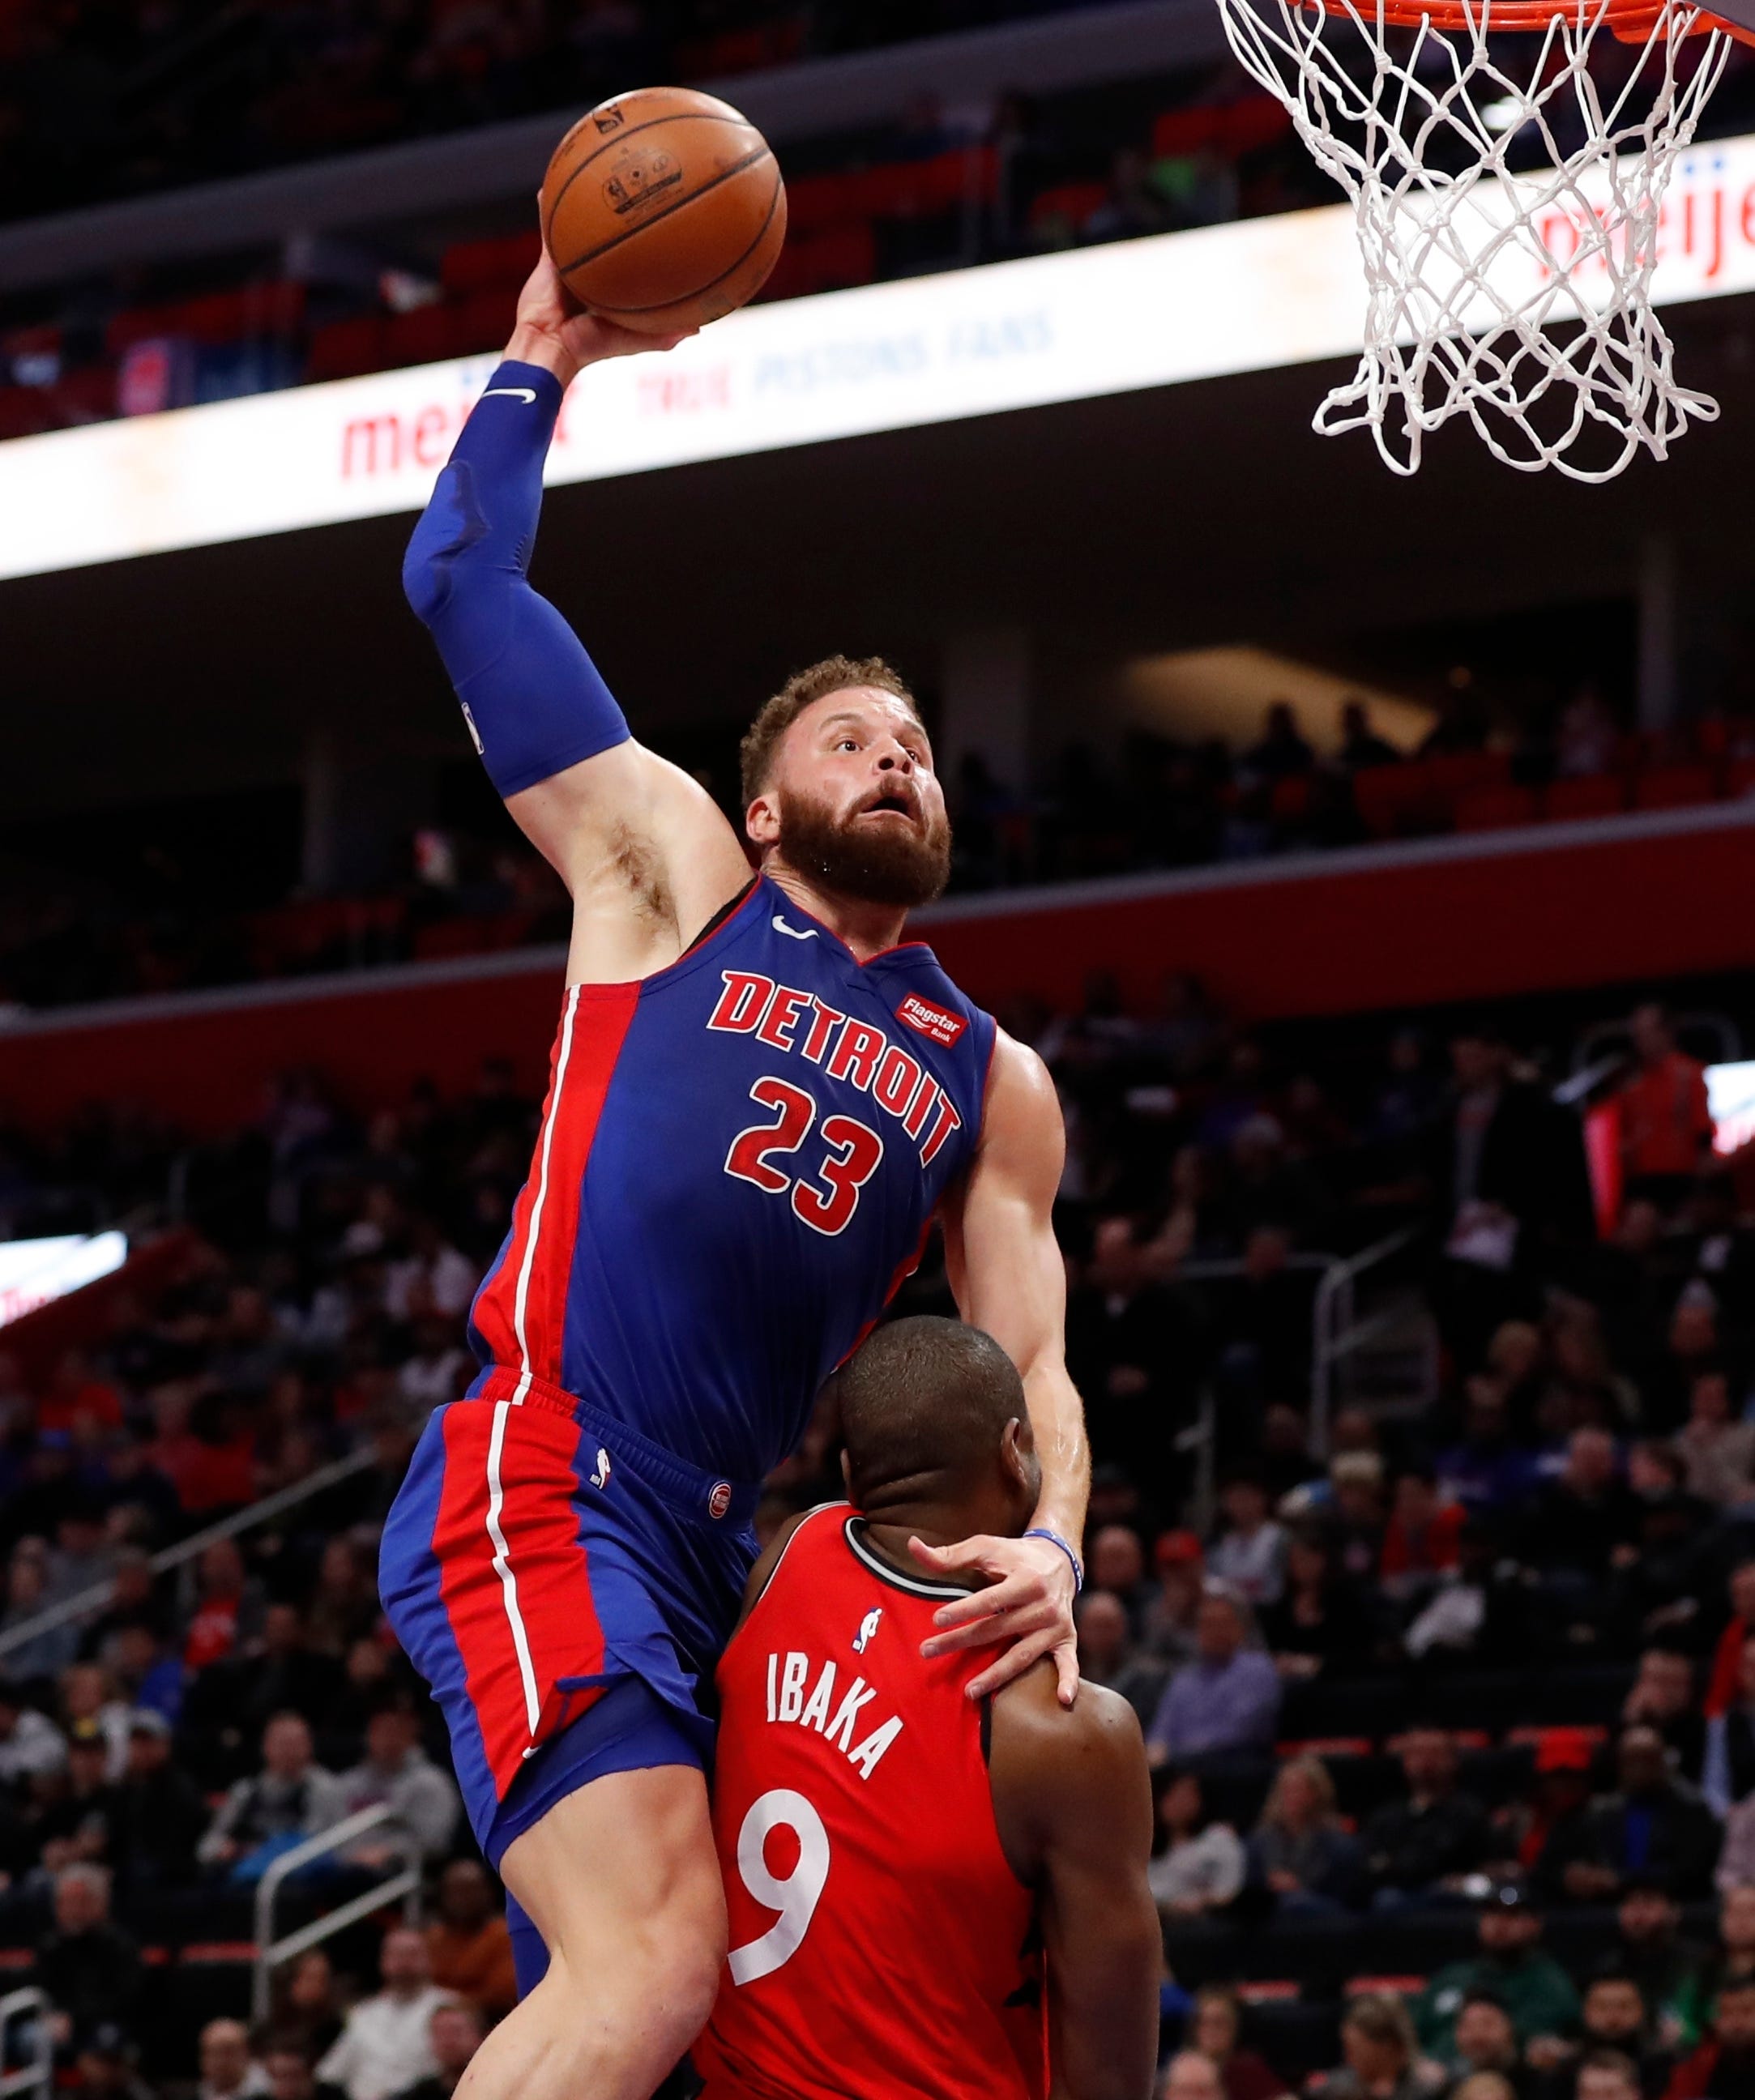 Detroit Pistons forward Blake Griffin (23) goes for a dunk over Toronto Raptors center Serge Ibaka (9) during the first half Sunday. Griffin finished with 27 points in Detroit's 112-107 OT win.